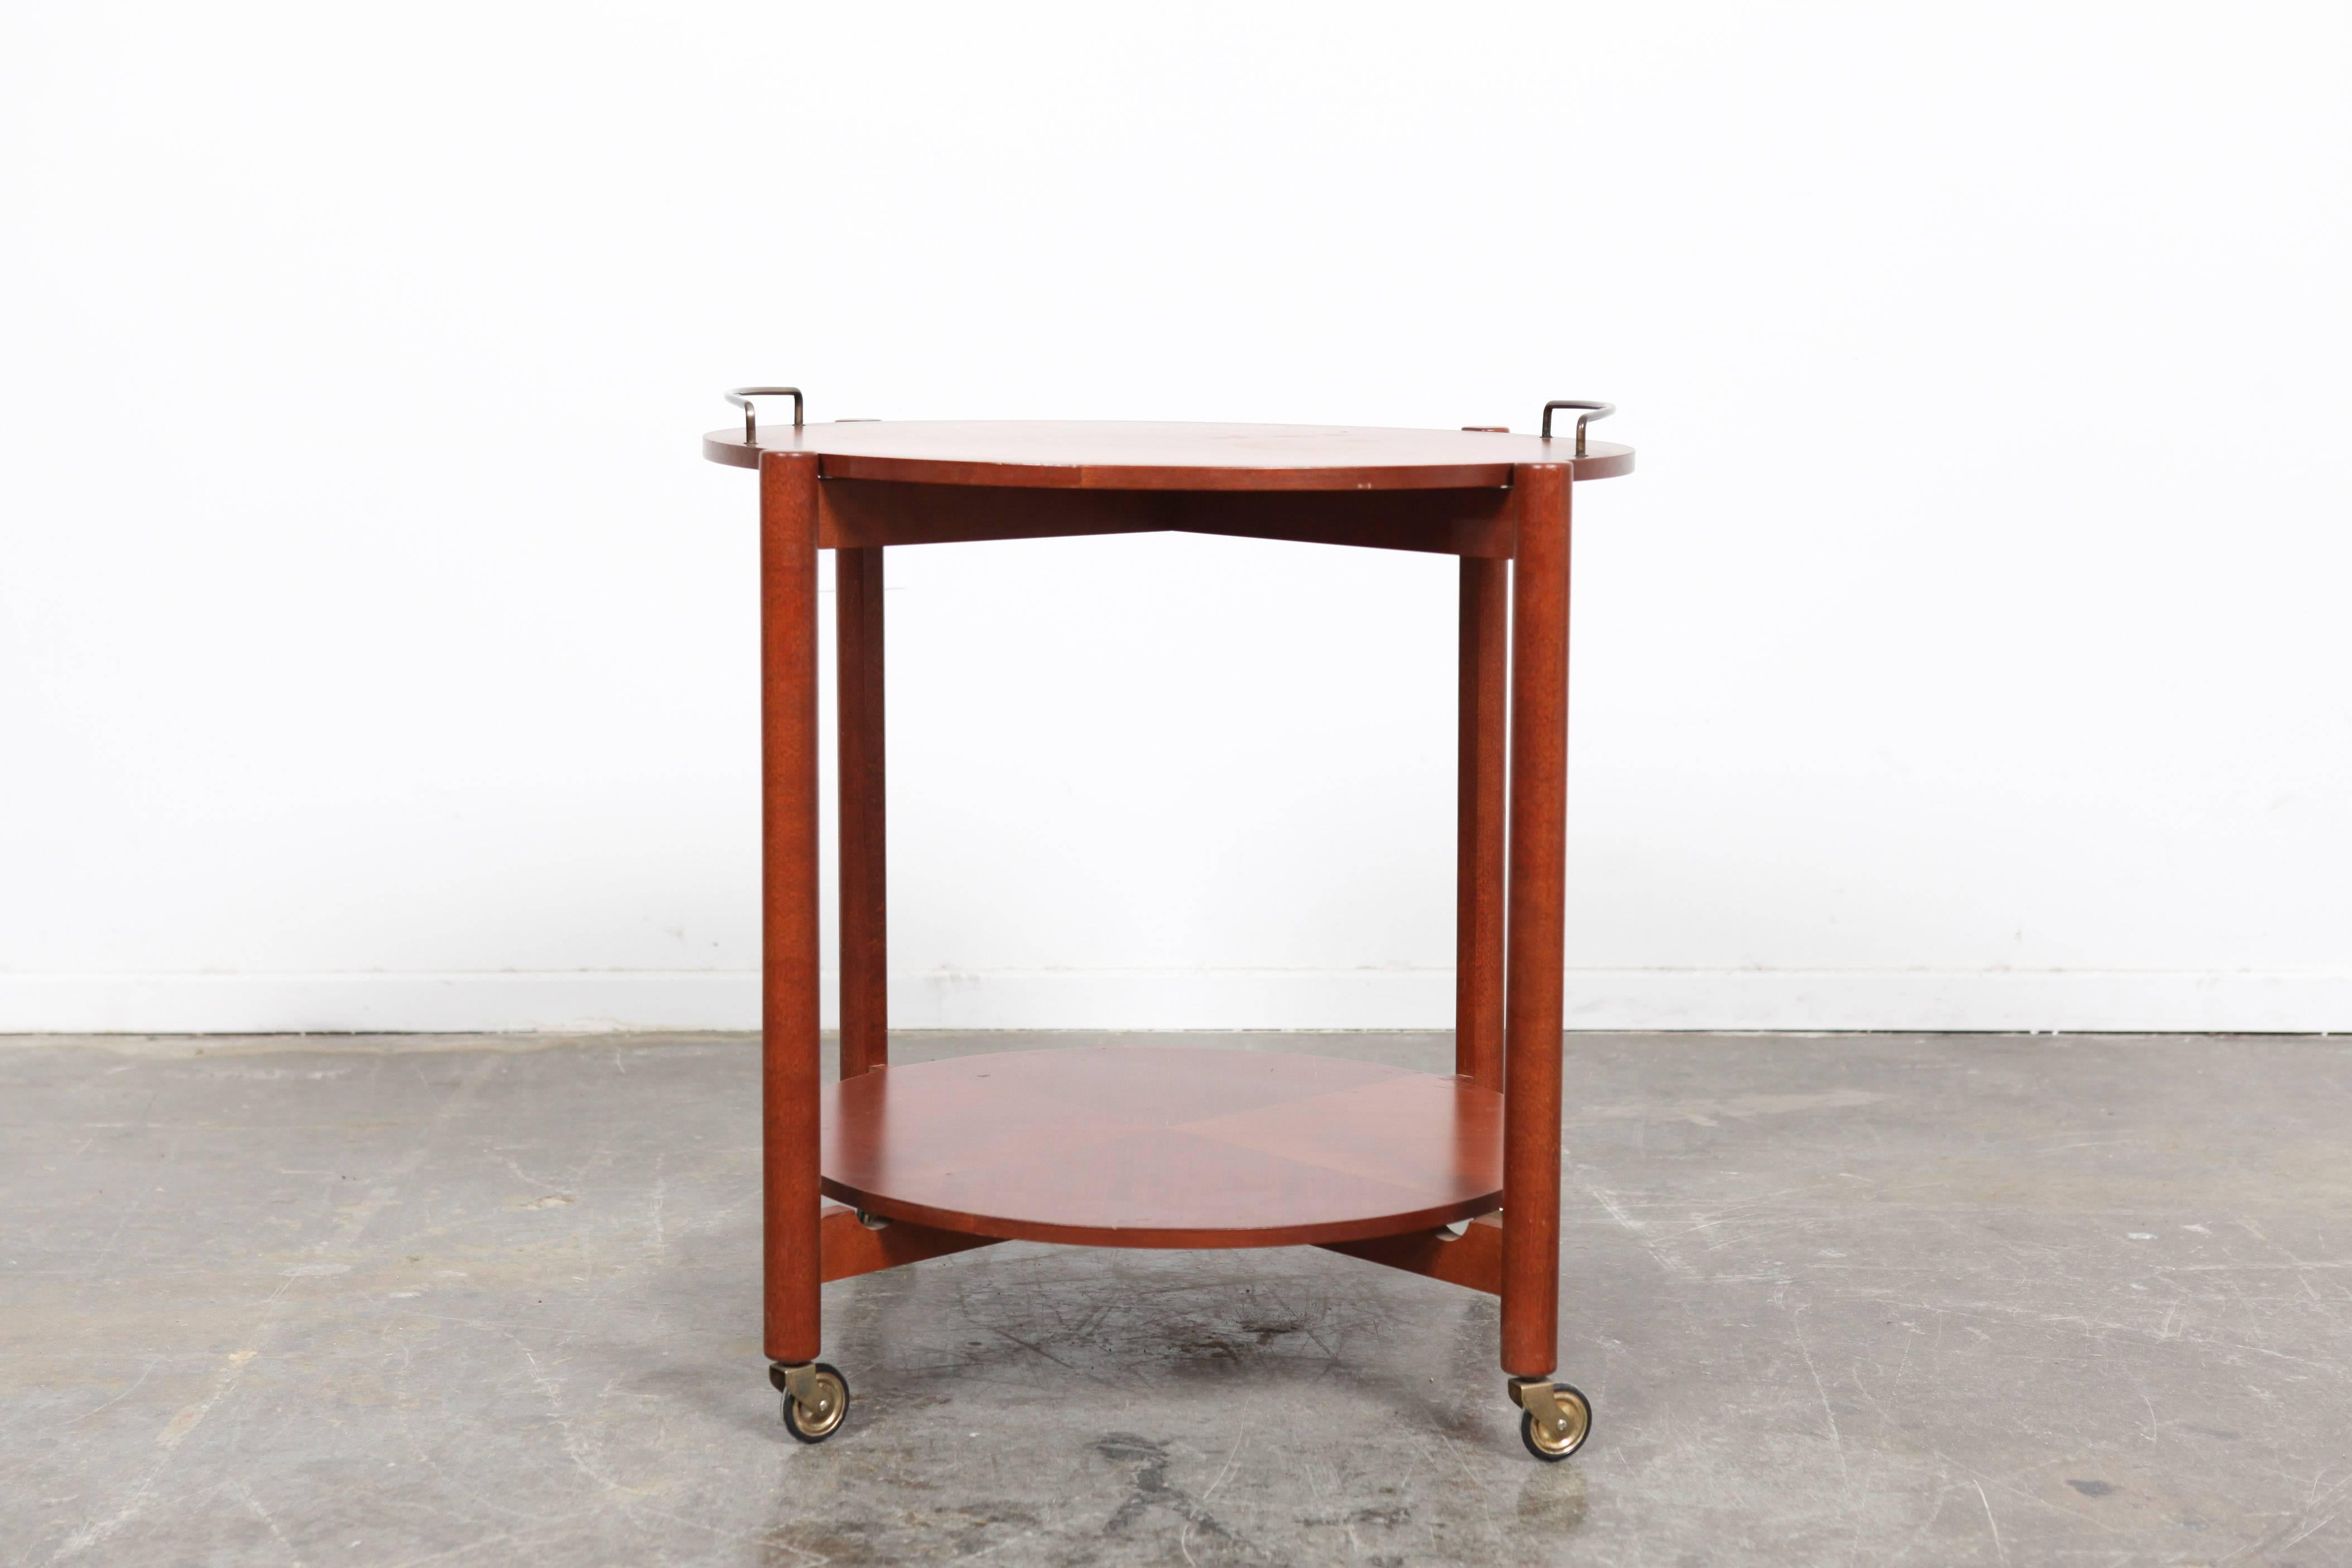 Swedish Mid-Century Modern  bi-level bar cart on casters featuring a removable drinks tray with two metal rails. Both circular surfaces feature beautiful segmented veneer.